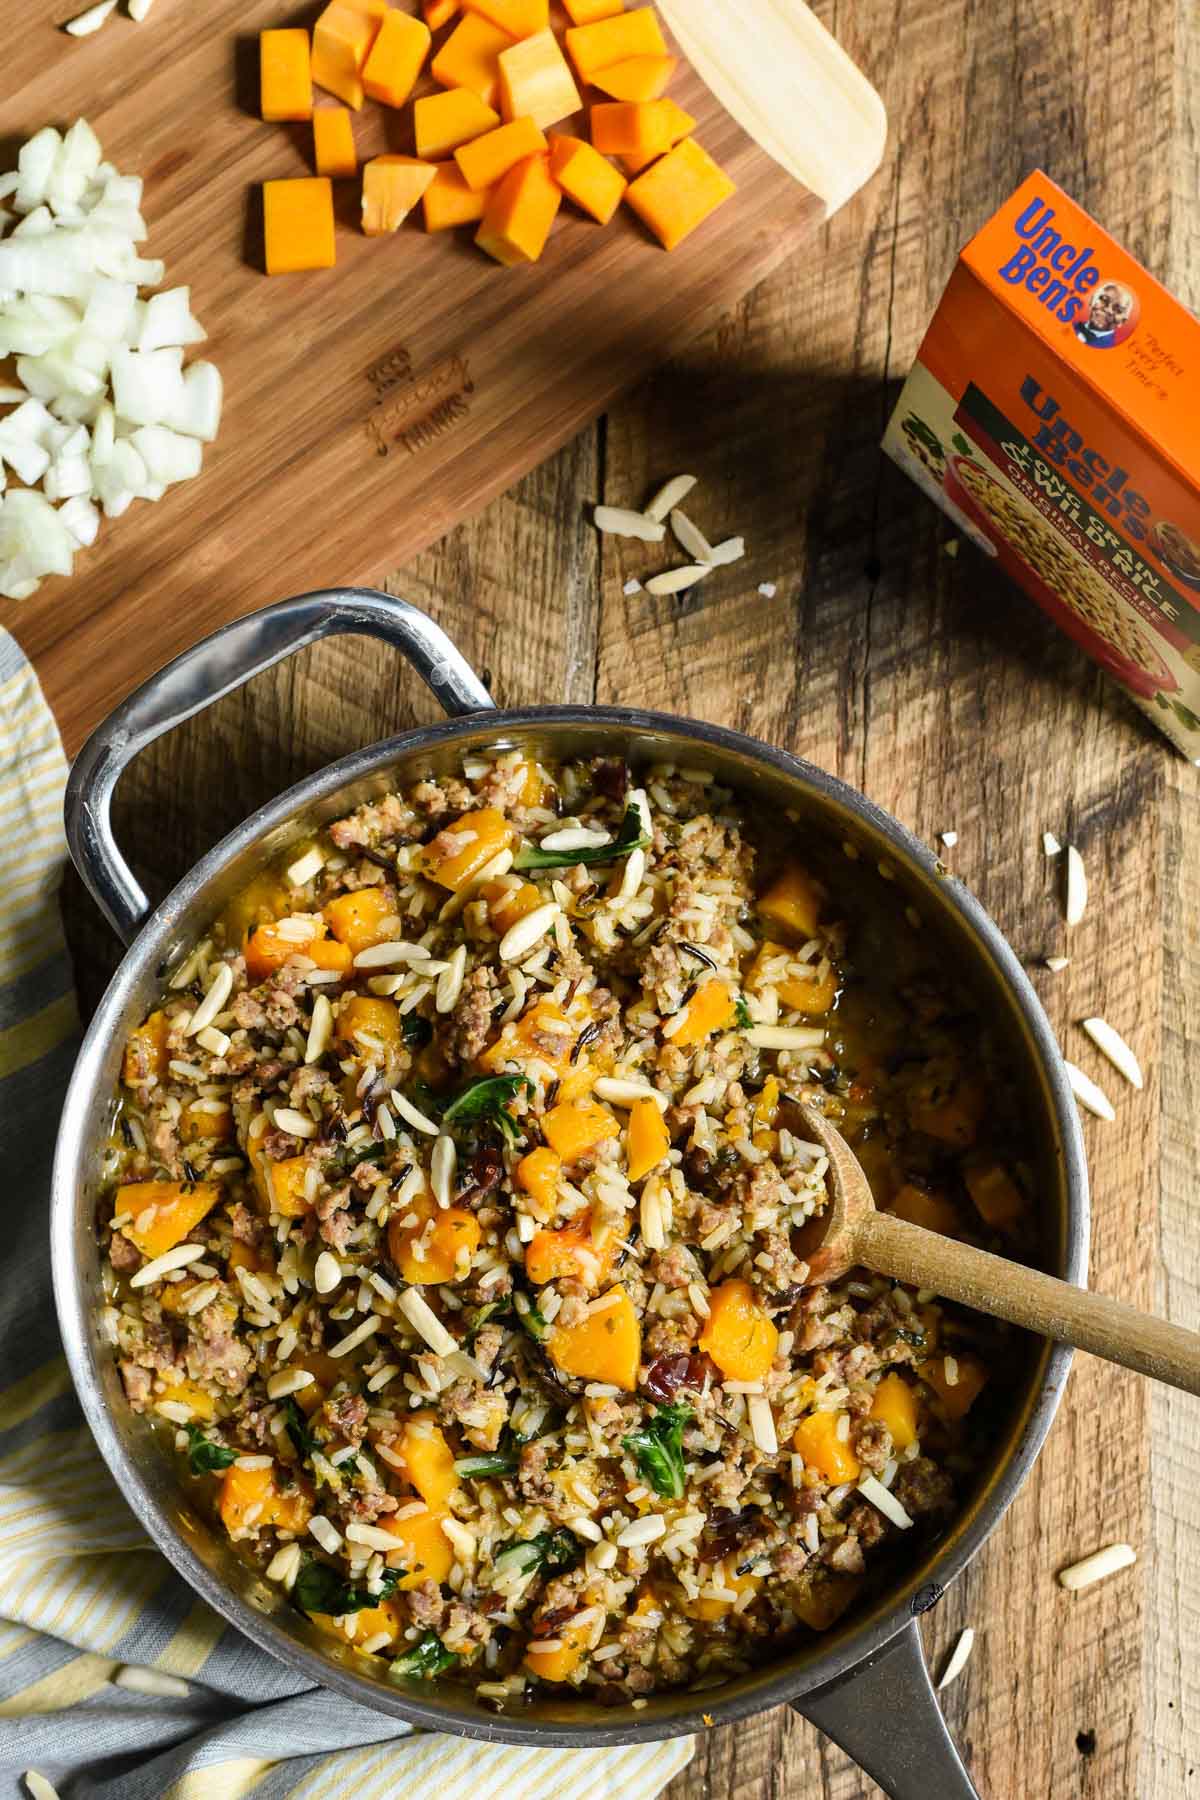 If you need a quick, healthy one pot meal, try this Skillet Sausage and Rice with butternut squash!